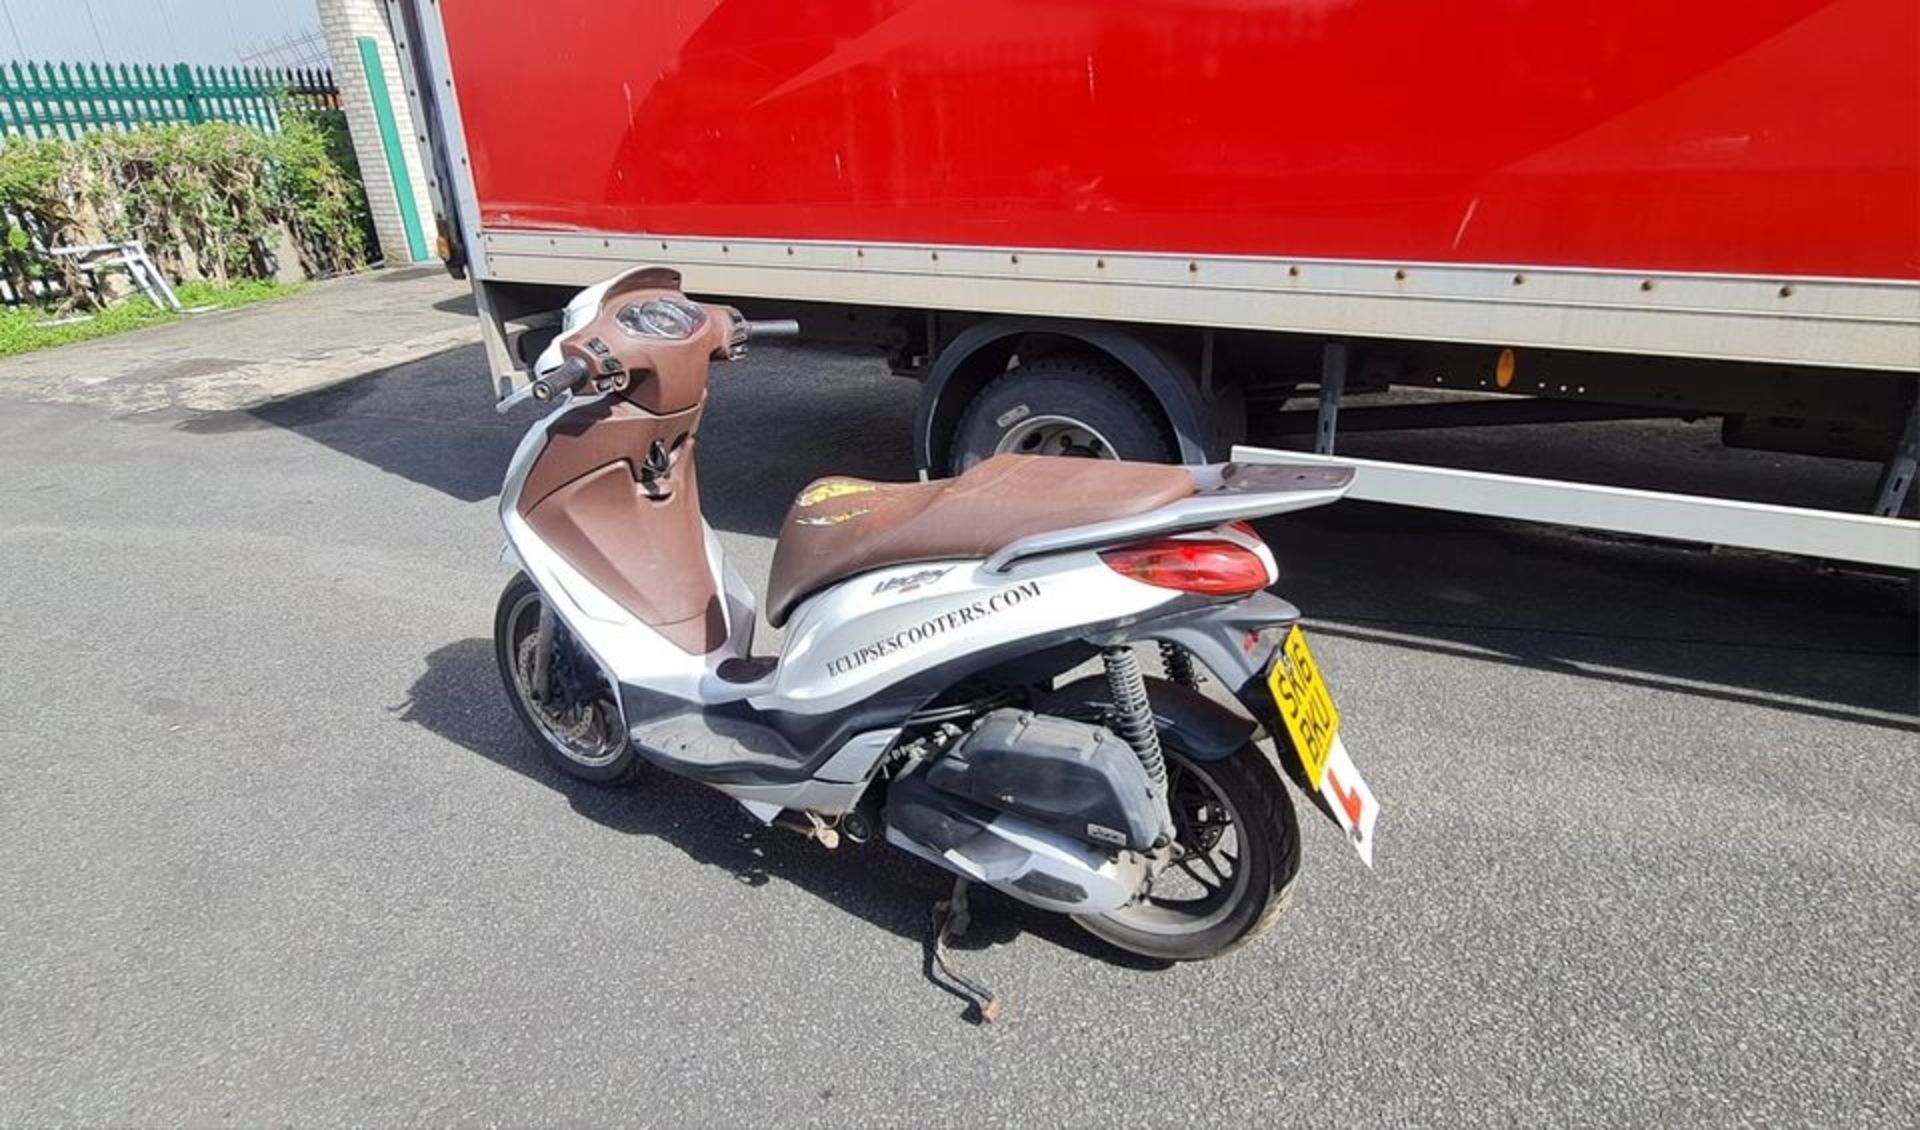 2016 Piaggio Medley 125 Scooter - Missing Key - Image 6 of 13